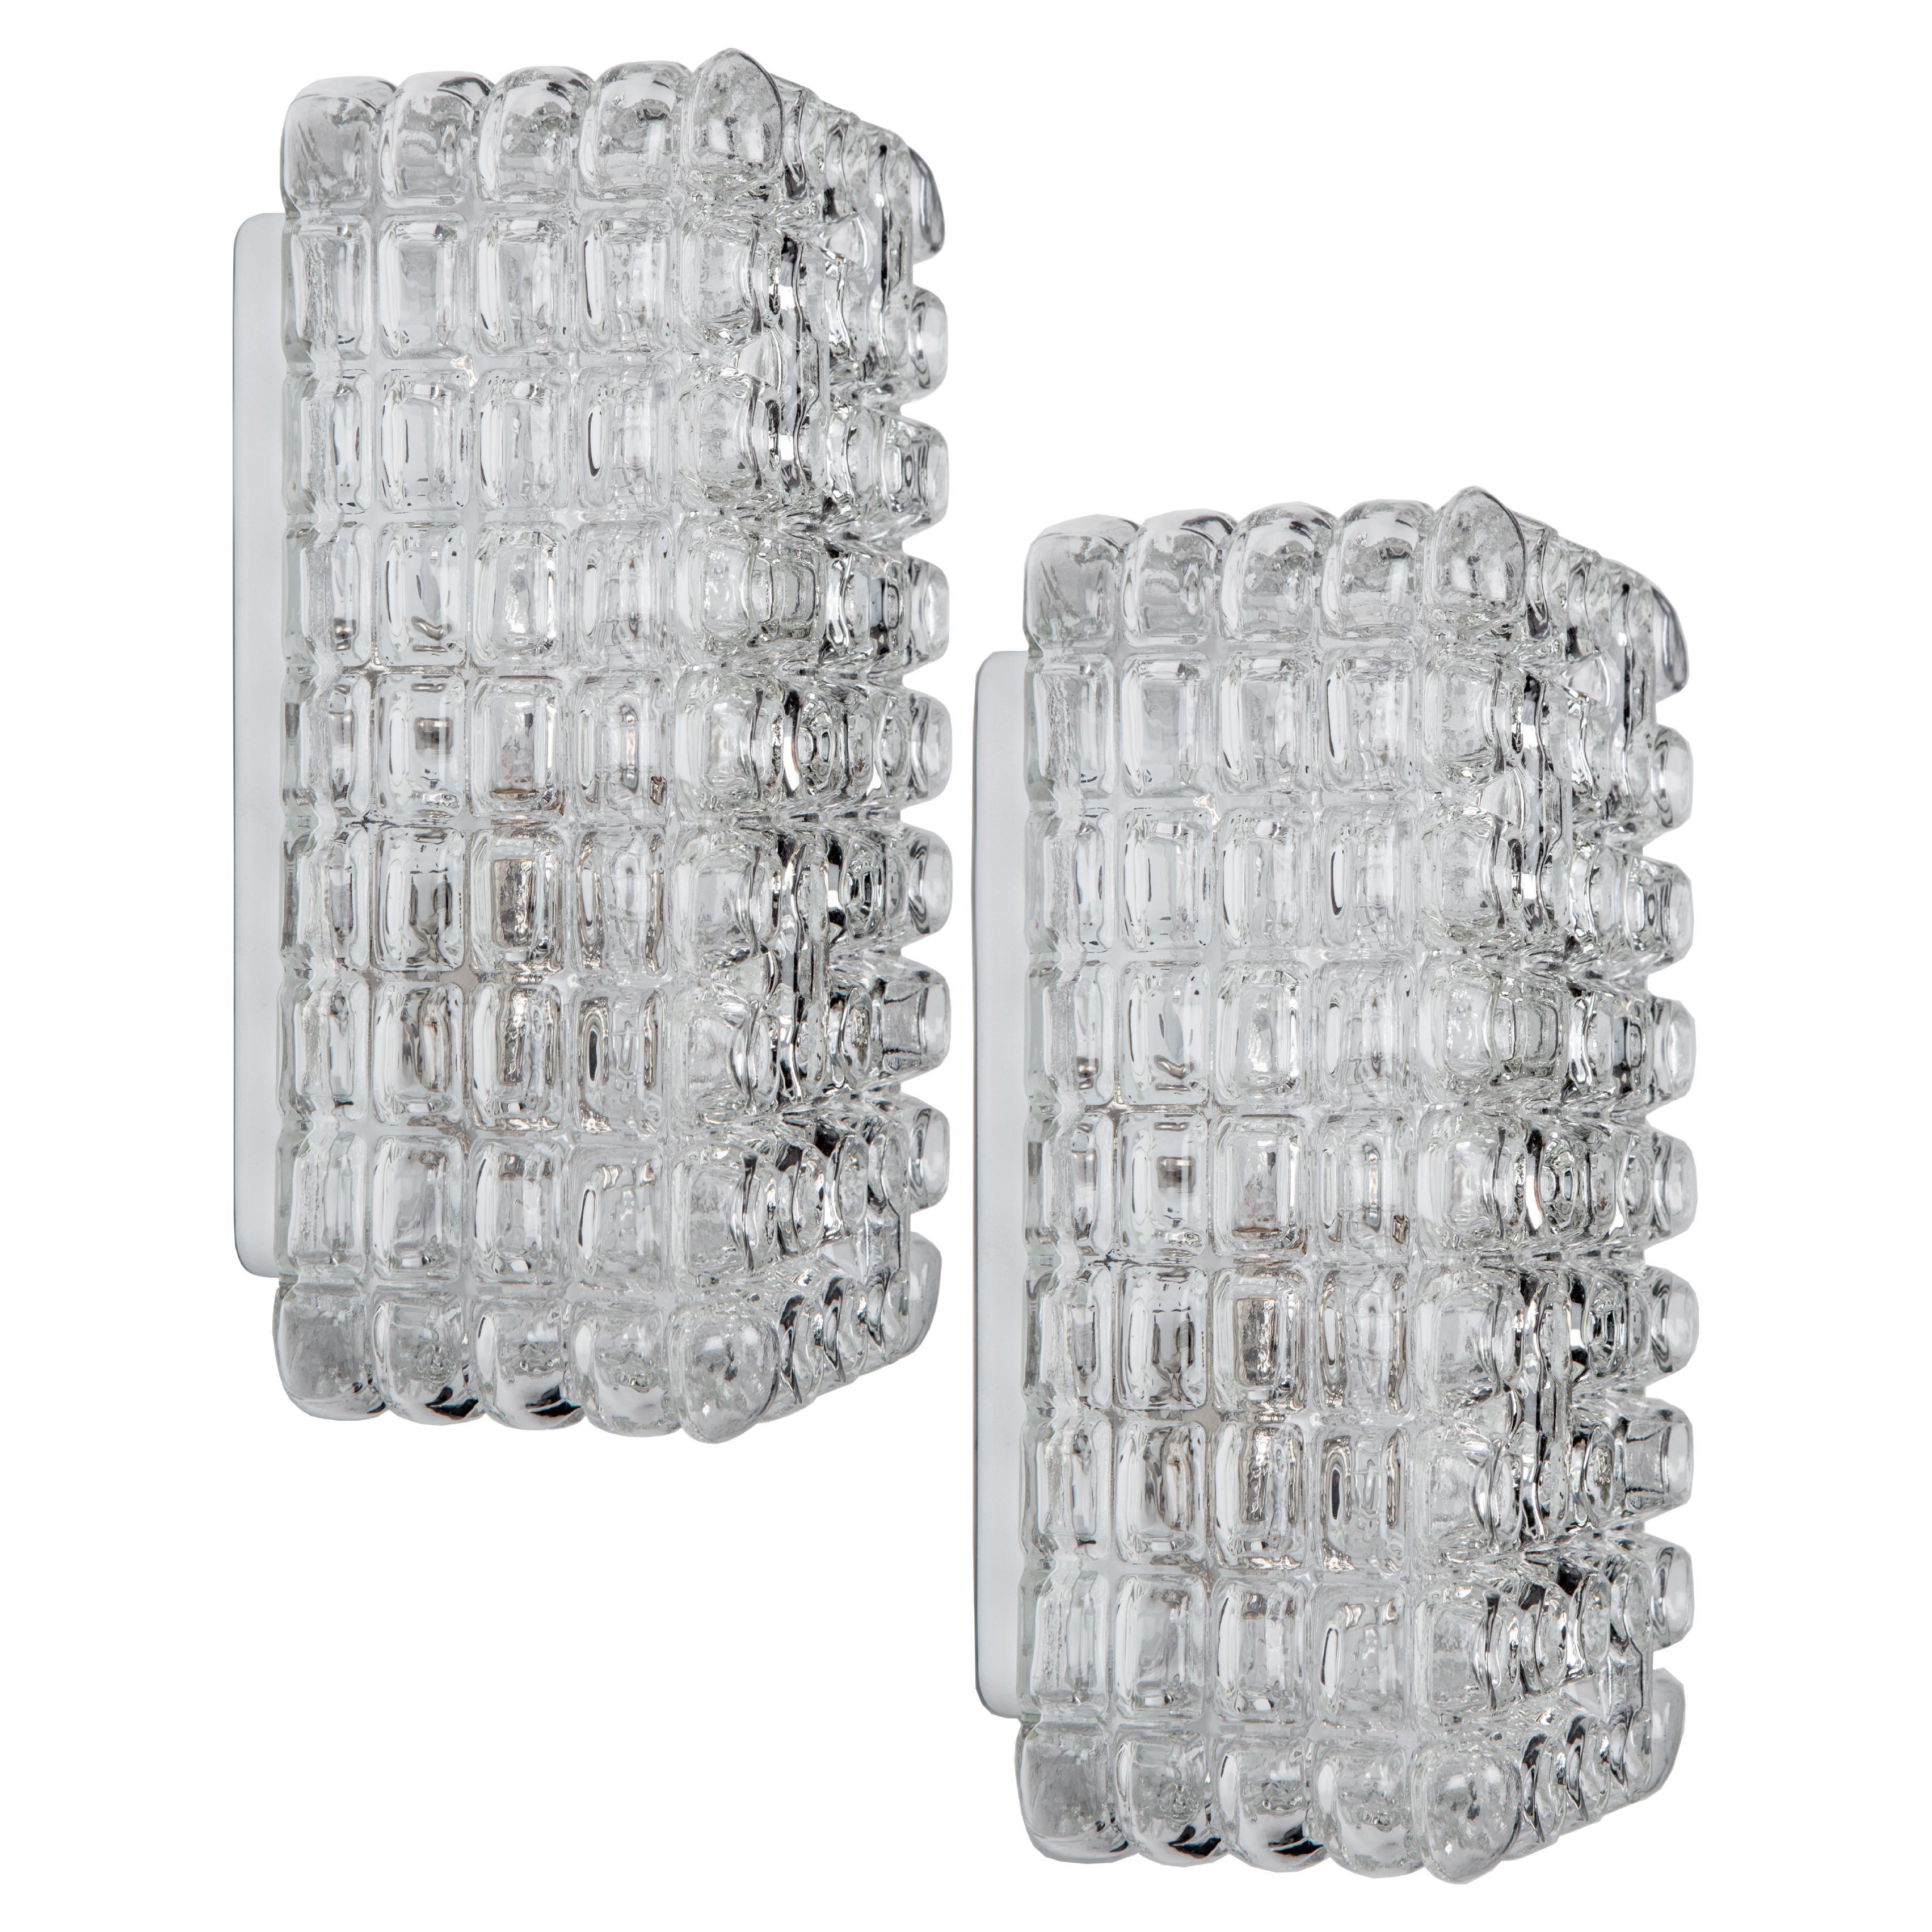 Pair of Midcentury European Clear Rectangular Bubble Glass Sconces, Circa 1970s For Sale